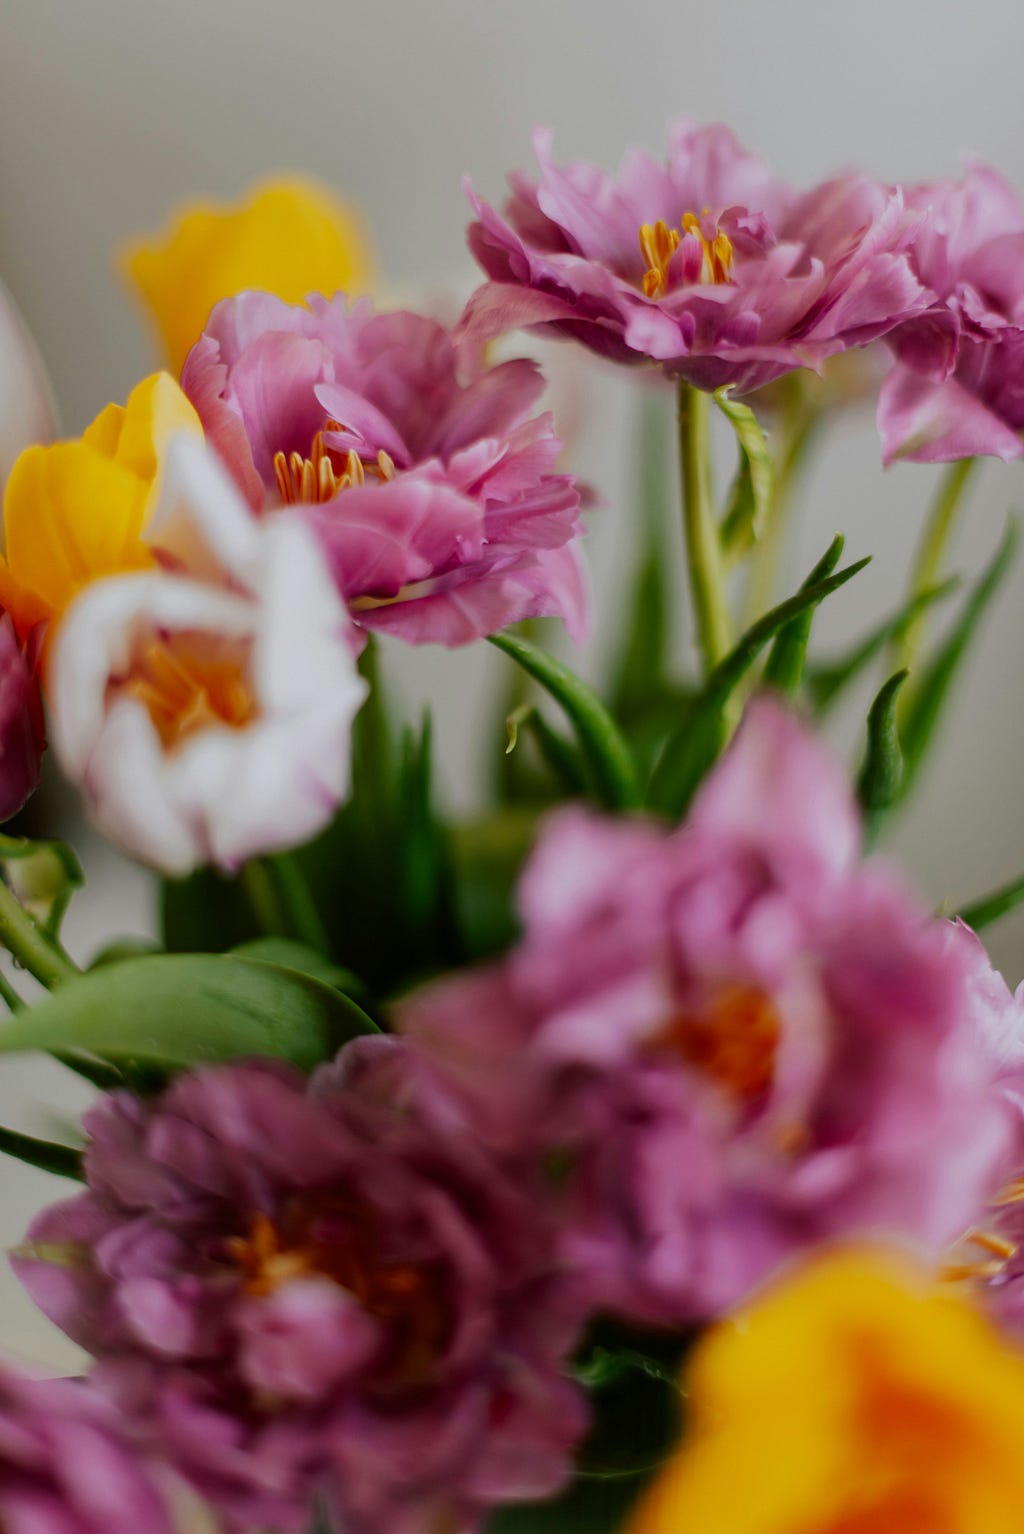 A close-up of a bouquet of pink, yellow, and white tulips with a shallow depth of field, highlighting the textures and colours